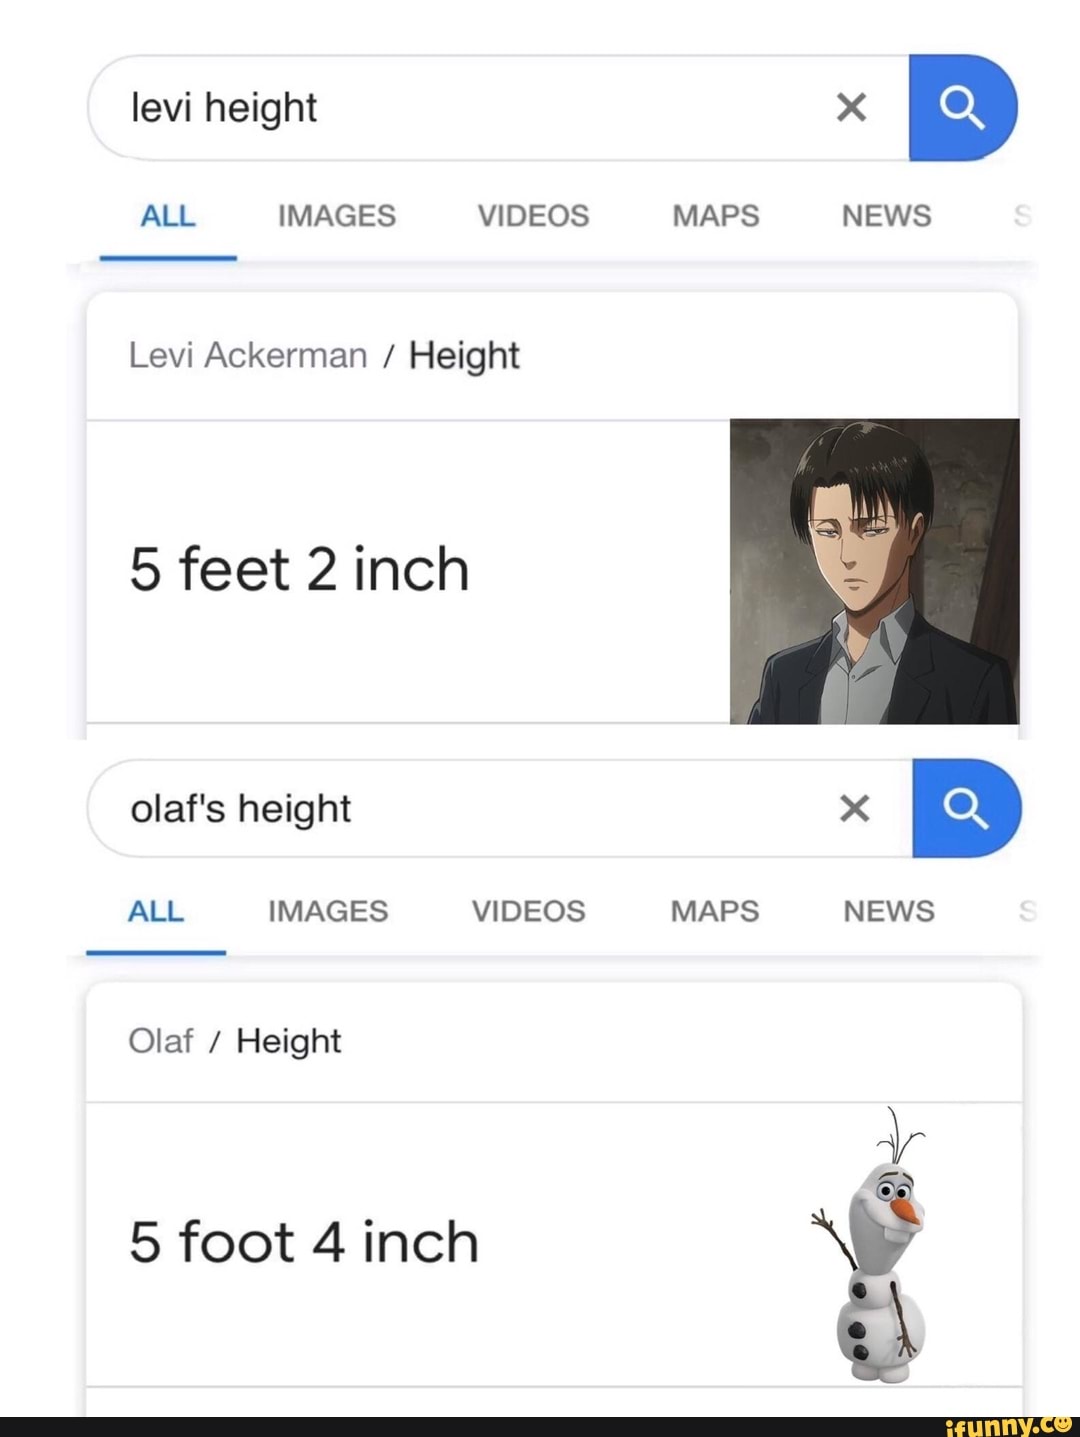 Levi Ackerman Height 5 Feet 2 Inch Olaf Height 5 Foot 4 Inch Ifunny His titan has a devastating ability to throw objects (such as boulders) with immense destructive capability, which makes for a deadly combination when paired with zeke's how tall is levi in feet? levi ackerman height 5 feet 2 inch olaf